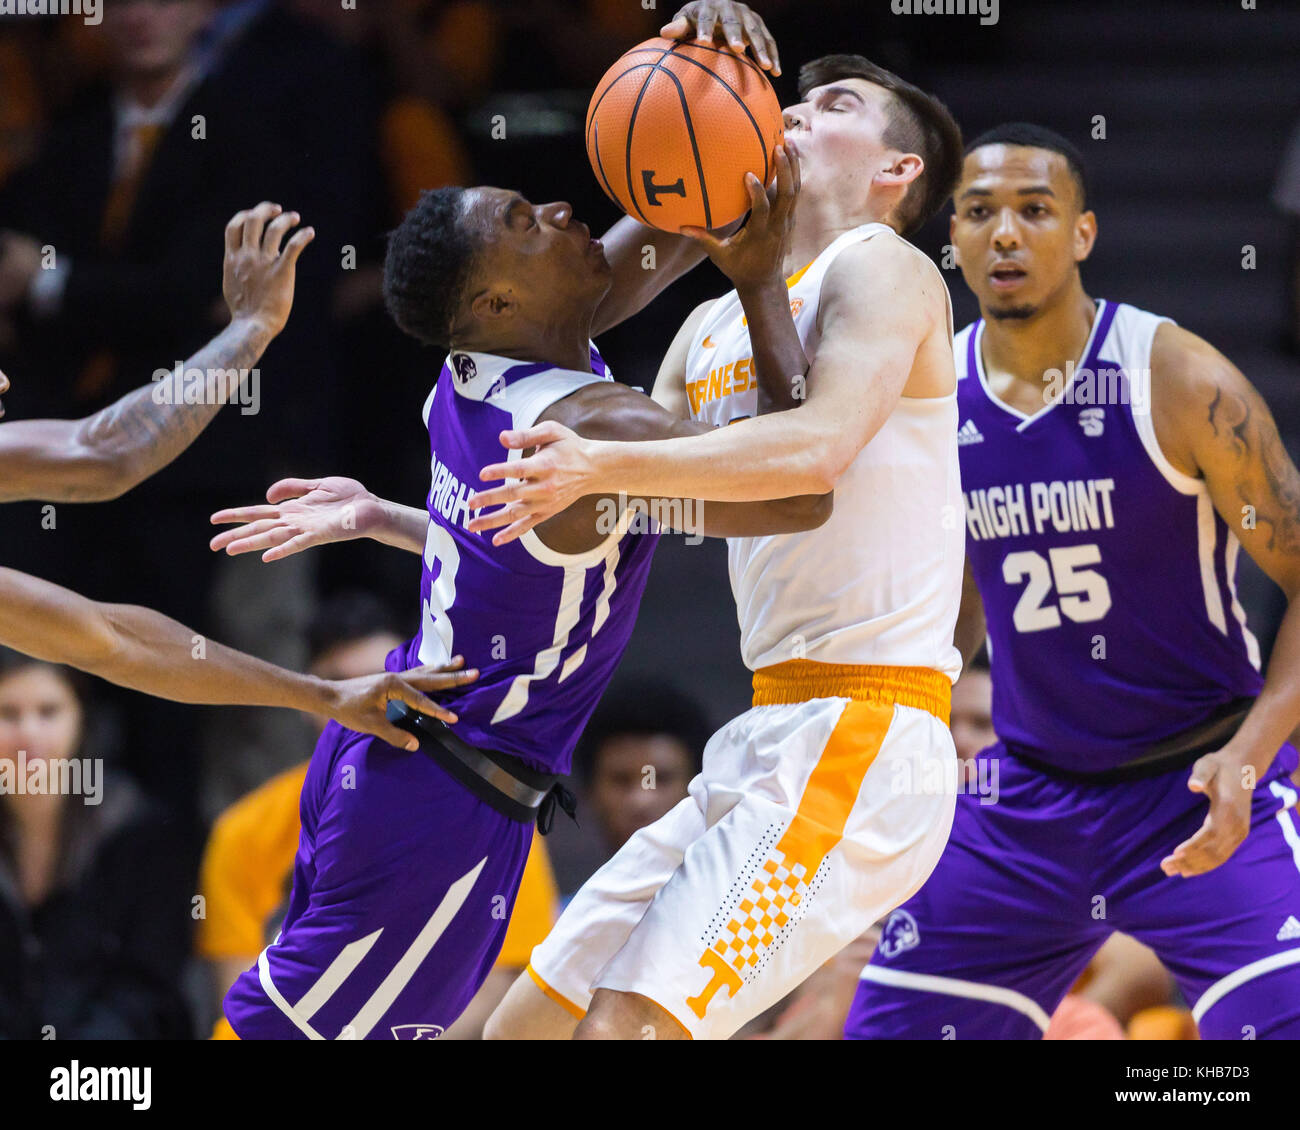 University of Tennessee, Tennessee November 14, 2017: Jamal Wright #3 of the High Point Panthers drives to the basket against John Fulkerson #10 of the Tennessee Volunteers during the NCAA basketball game between the University of Tennessee Volunteers and the High Point University Panthers at Thompson Boling Arena in Knoxville TN Tim Gangloff/CSM Stock Photo